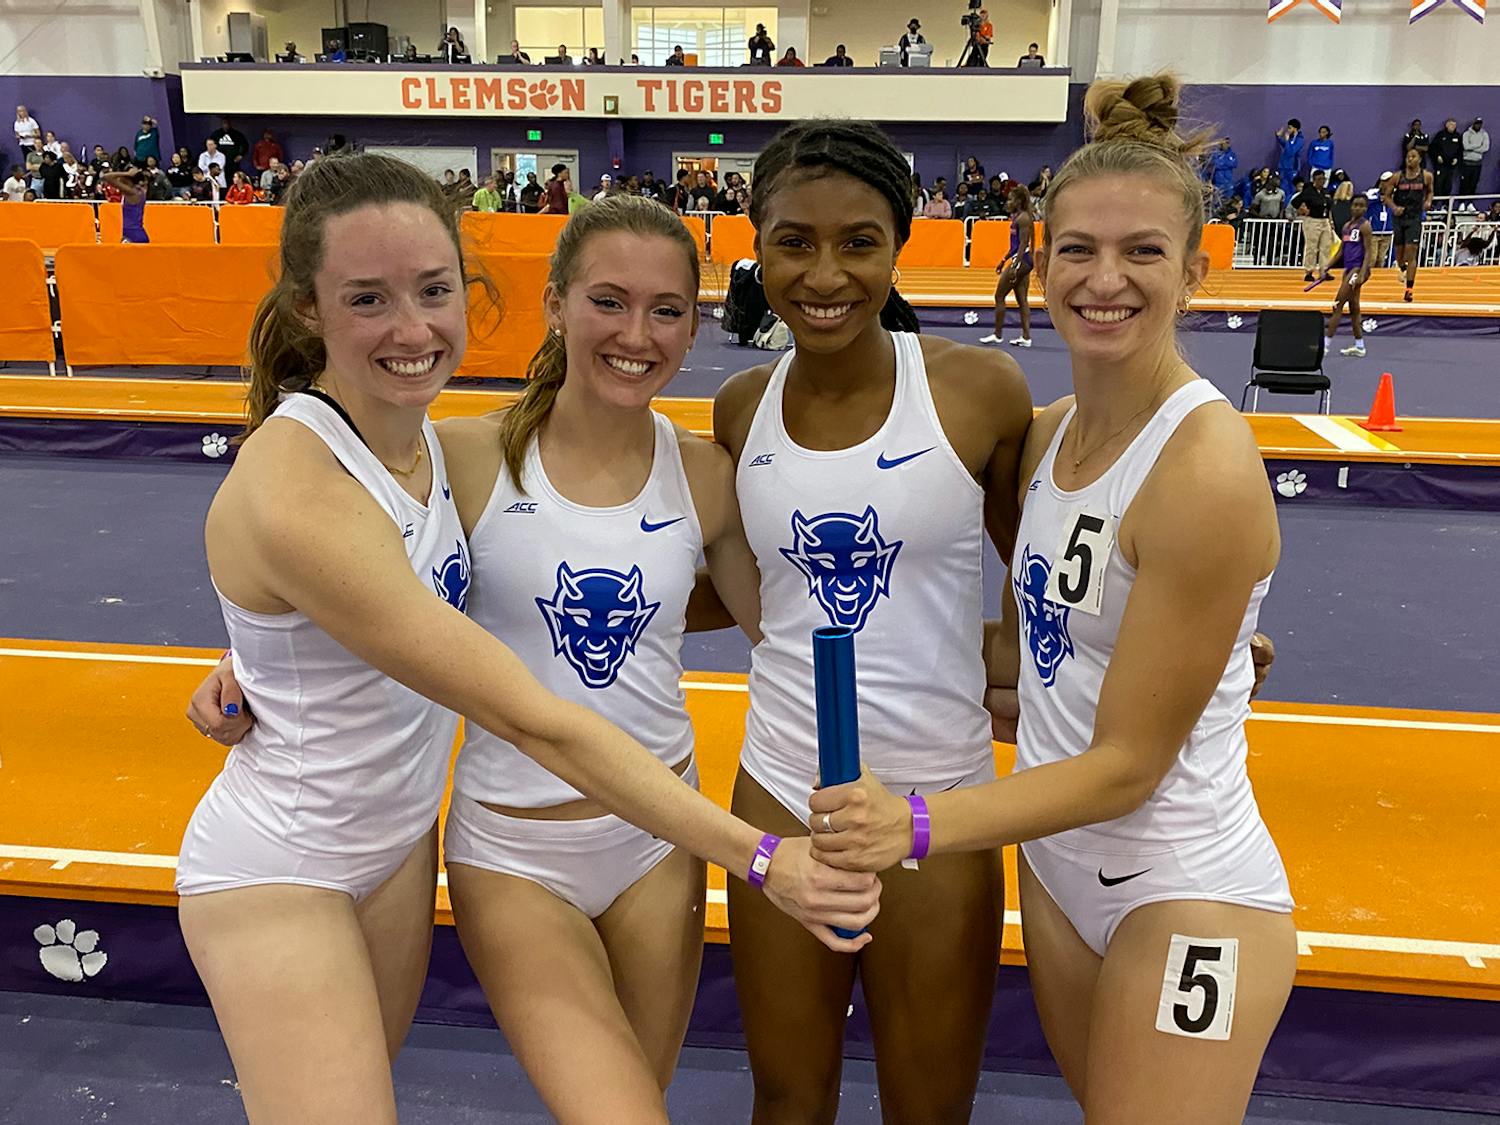 Duke's women's 4x400m relay team at the Tiger Paw Invitational.